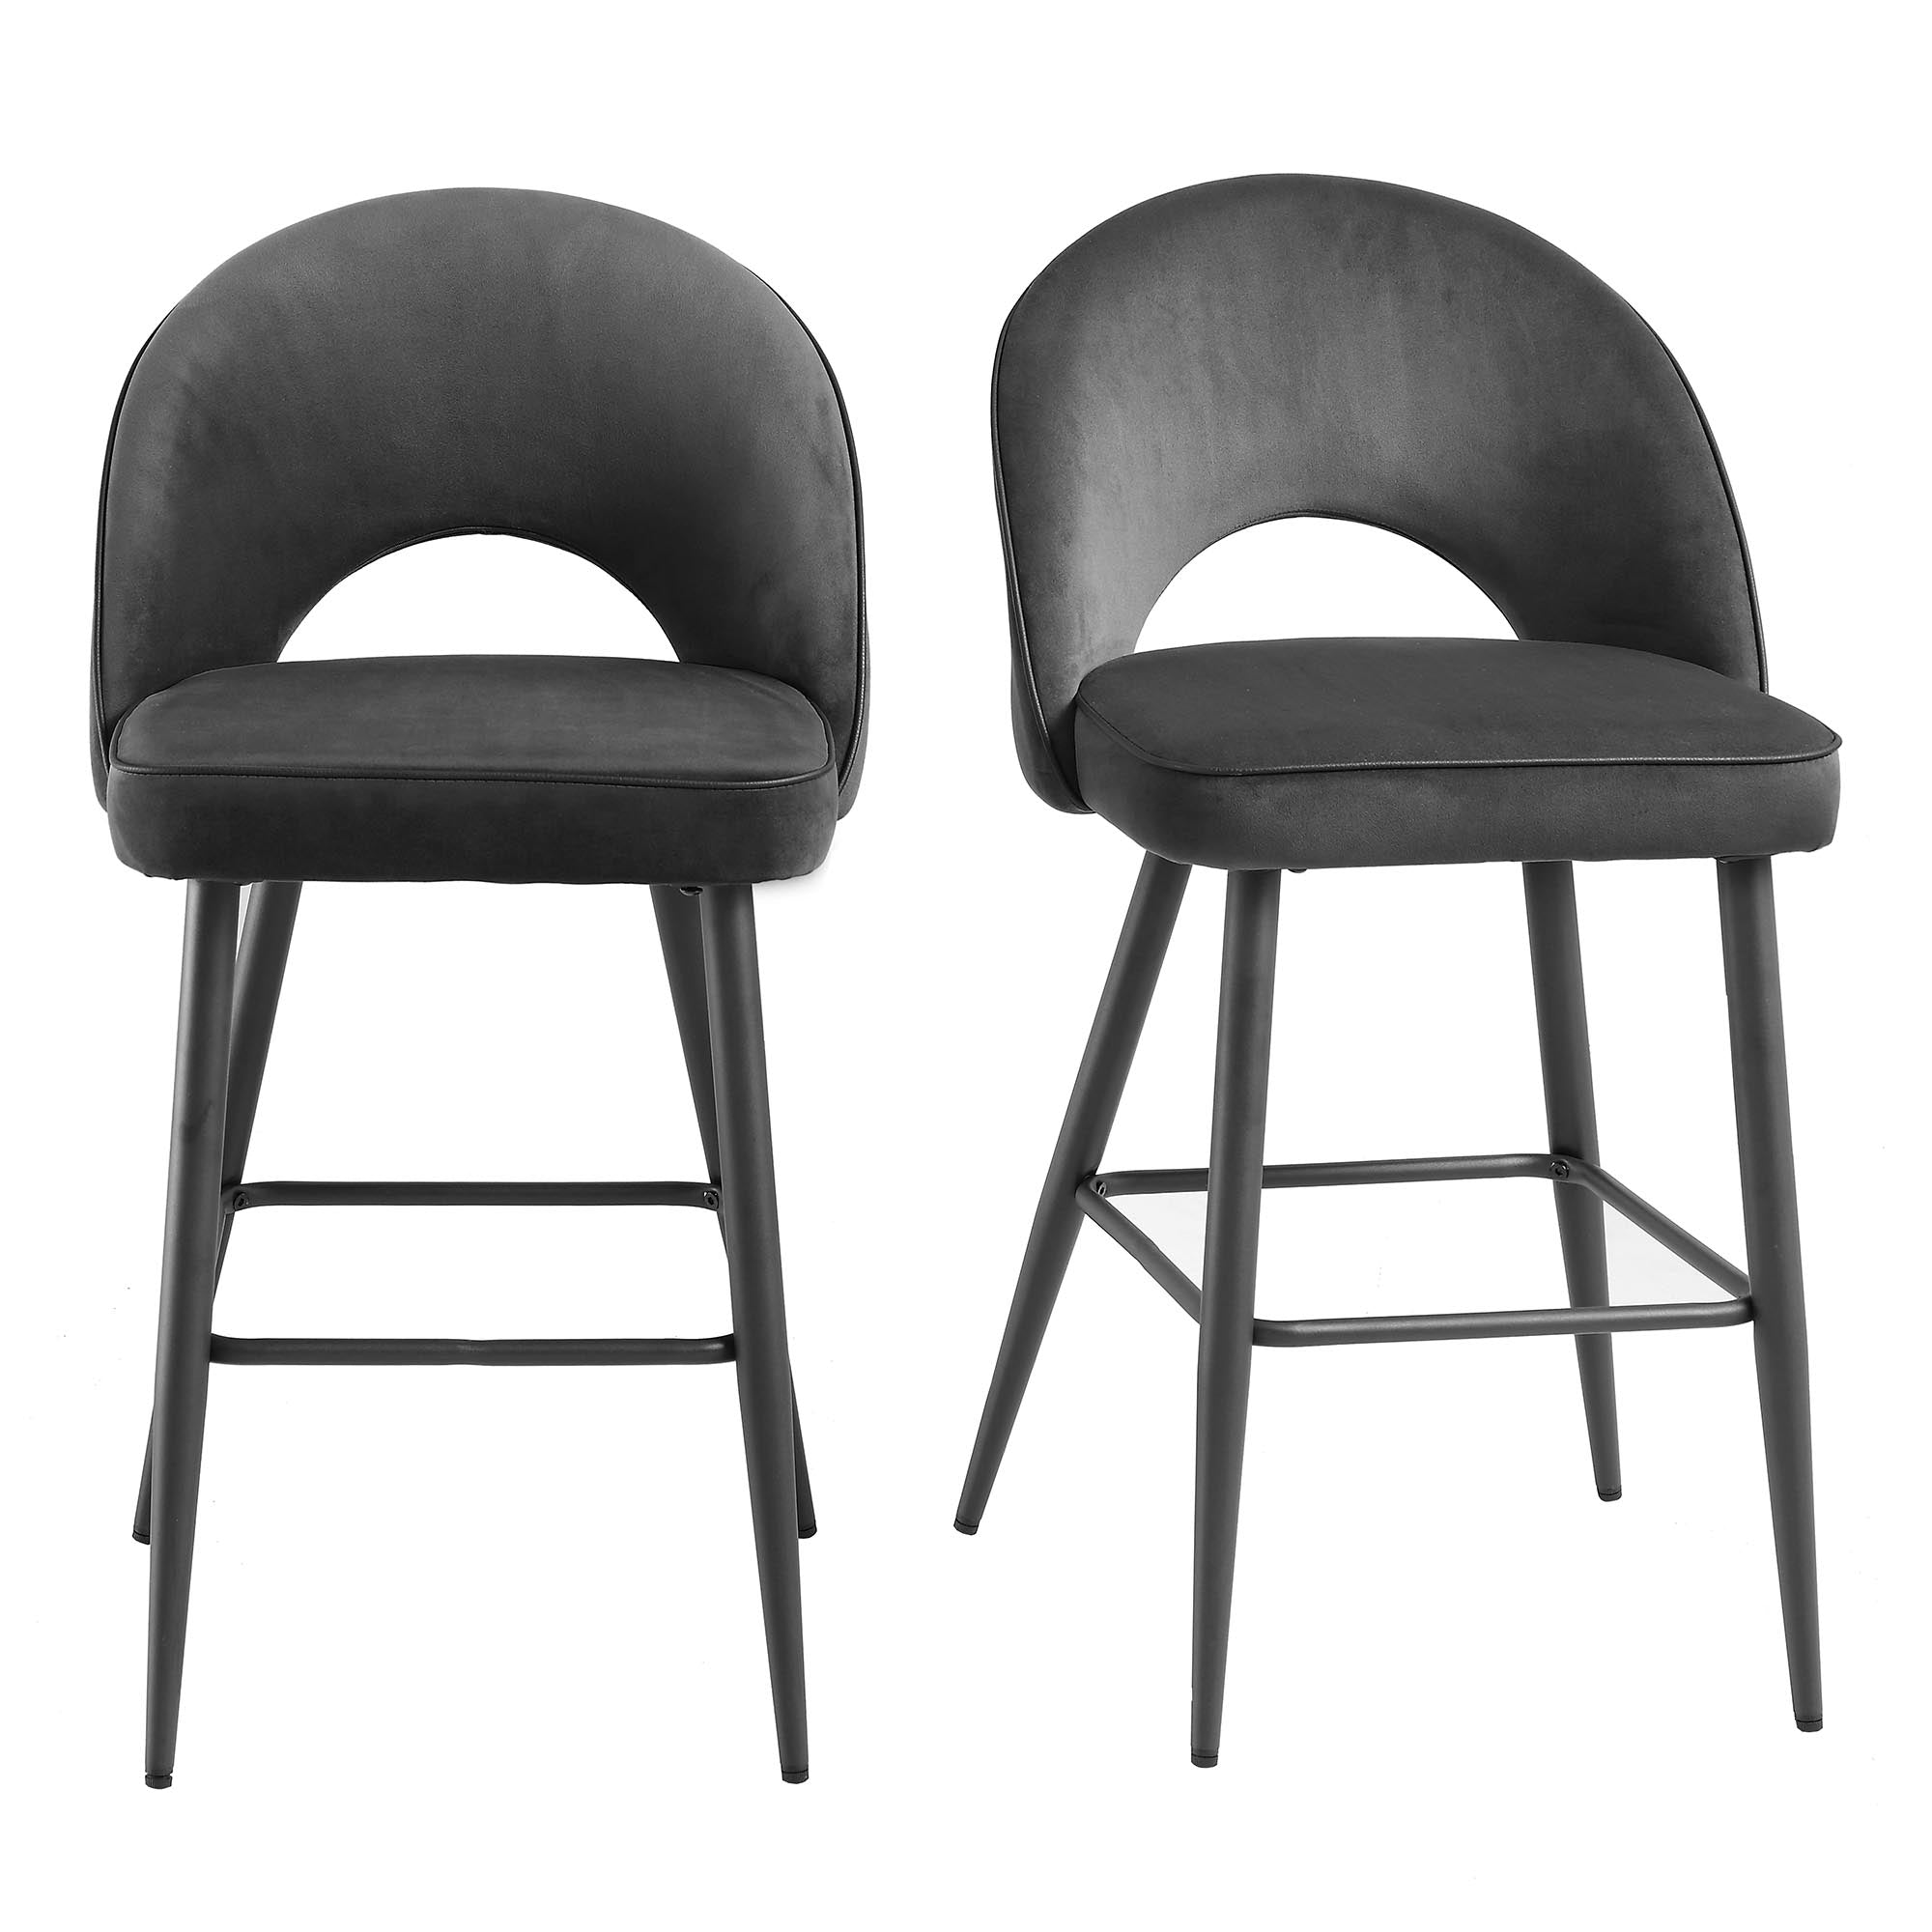 Oakley Set of 2 Dark Grey Velvet Upholstered Counter Stools with Contrast Piping